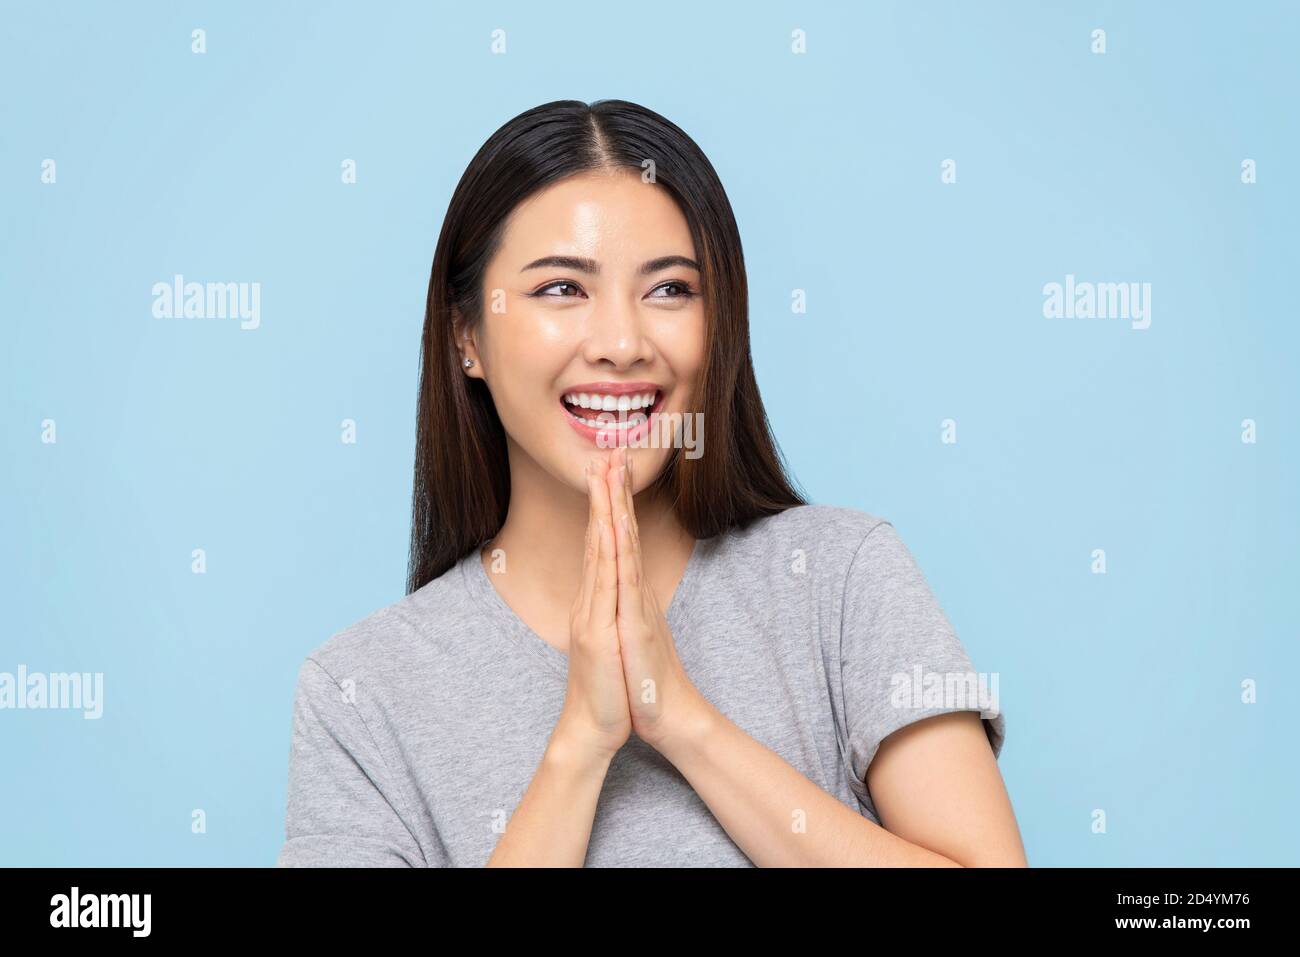 Smiling beautiful Asian woman doing Wai gesture for greeting or thank you isolated on light blue background Stock Photo